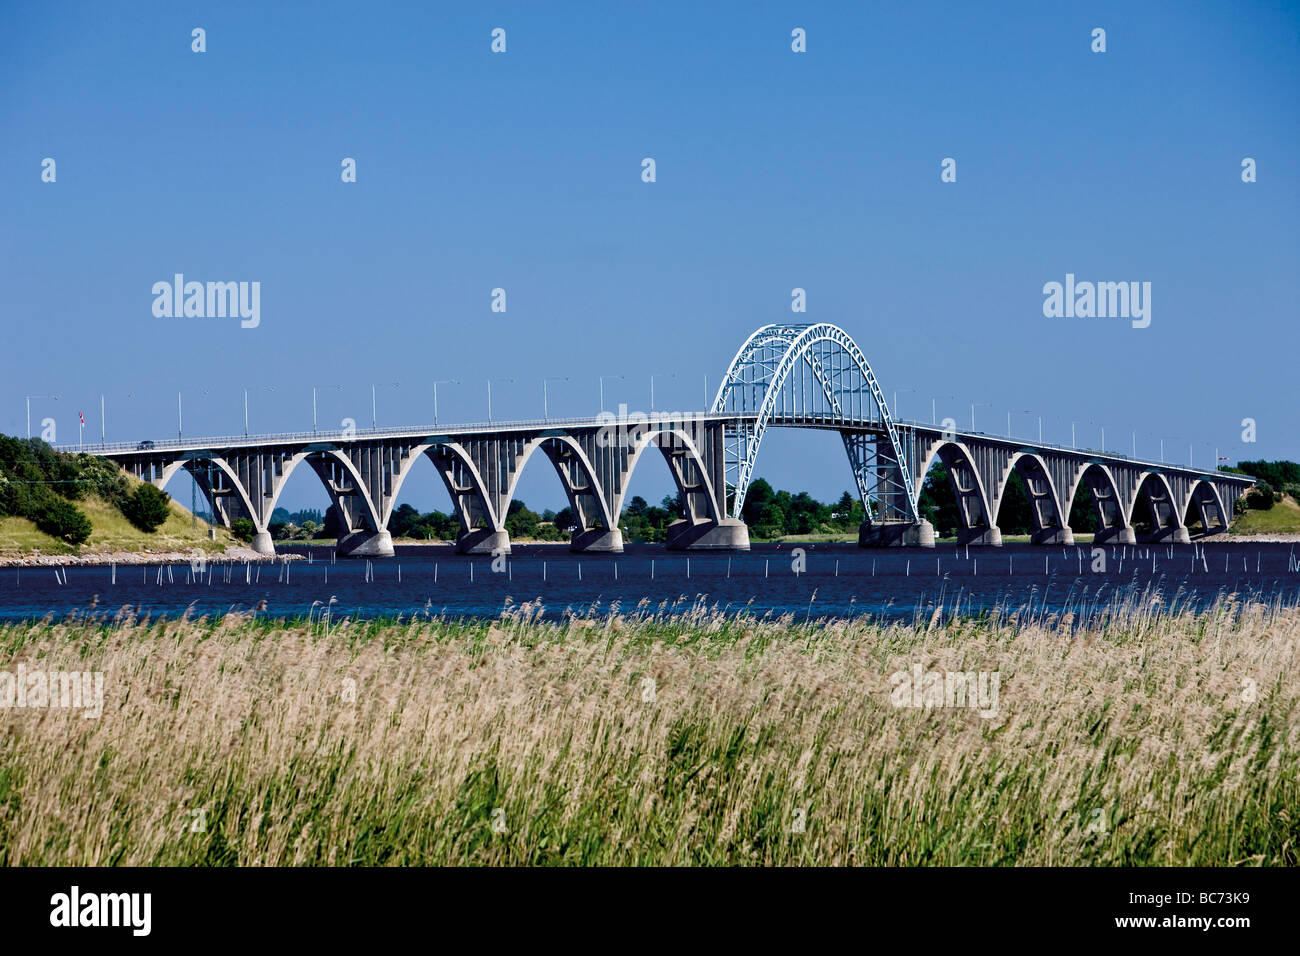 Dronning High Resolution Stock Photography and Images - Alamy